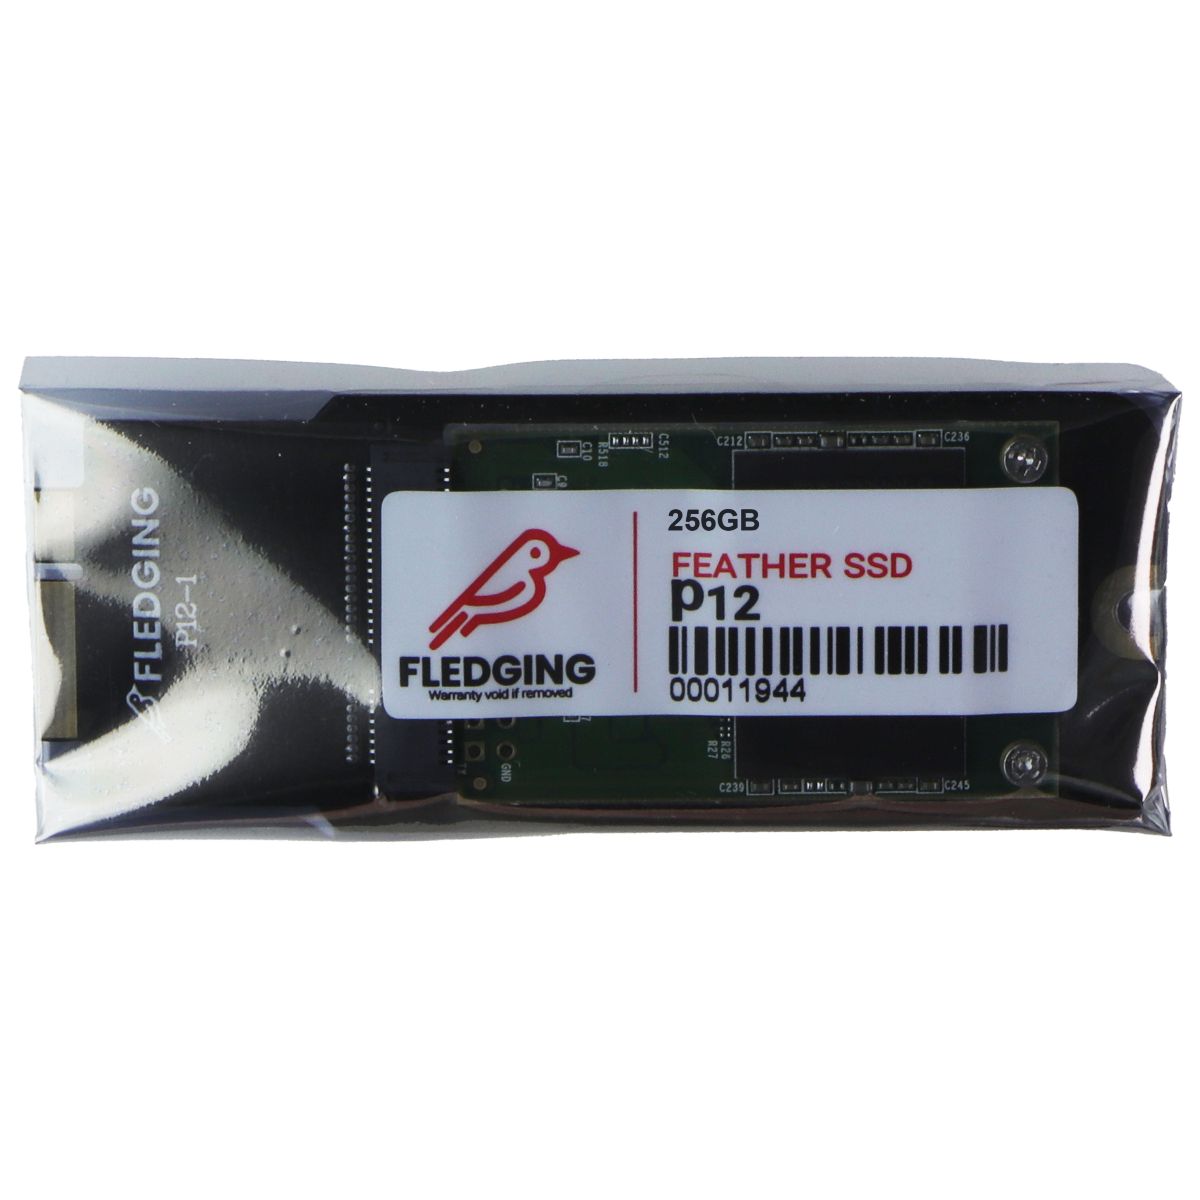 Fledging 256GB Feather P12 SATA 3 SSD Upgrade for MacBook Pro 2012 - 2013 Digital Storage - Solid State Drives Fledging    - Simple Cell Bulk Wholesale Pricing - USA Seller